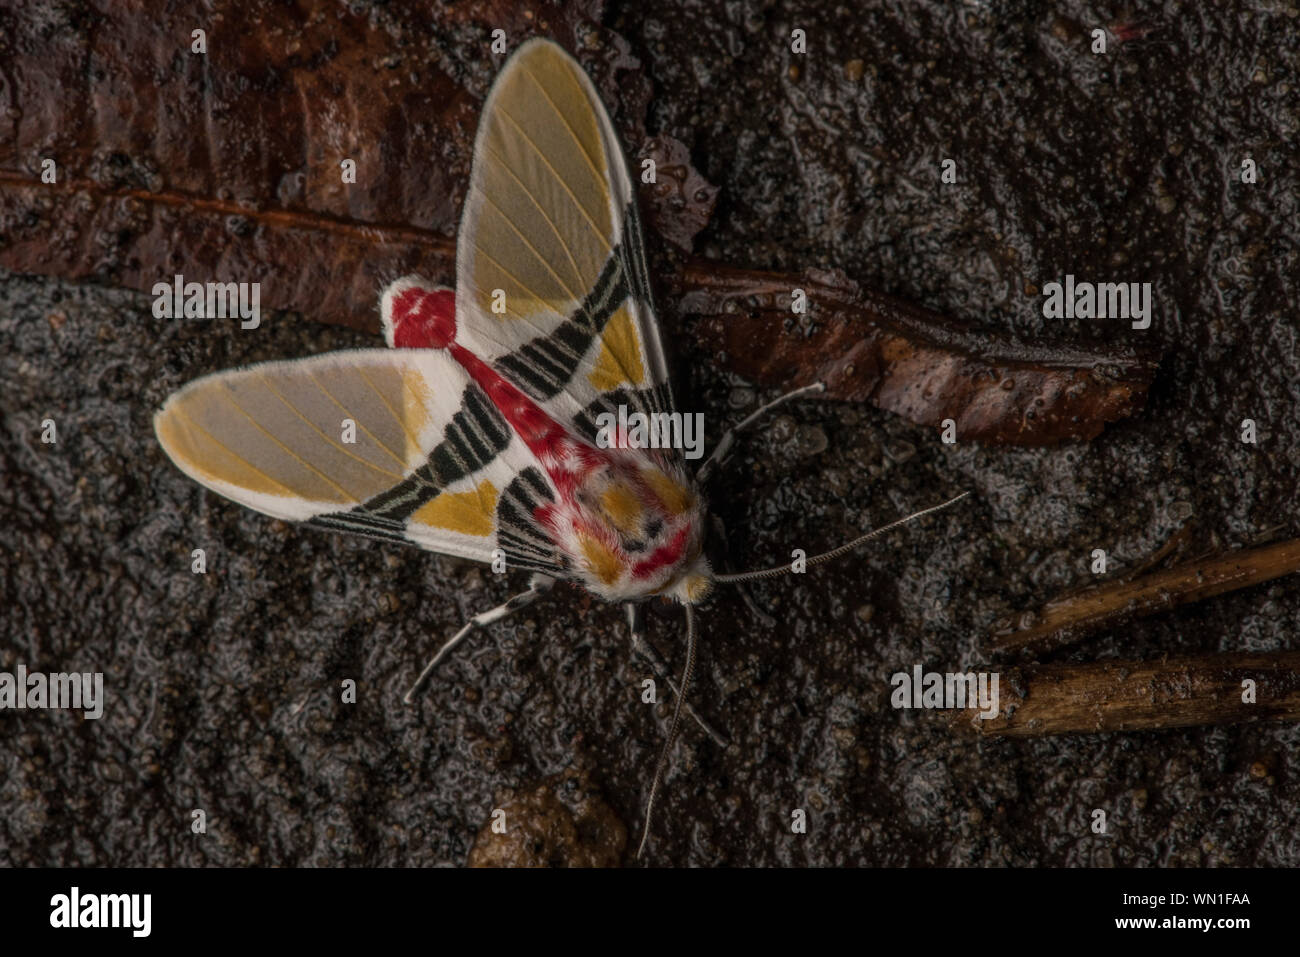 An Idalus species moth from the Mindo region of Ecuador in South America. Stock Photo